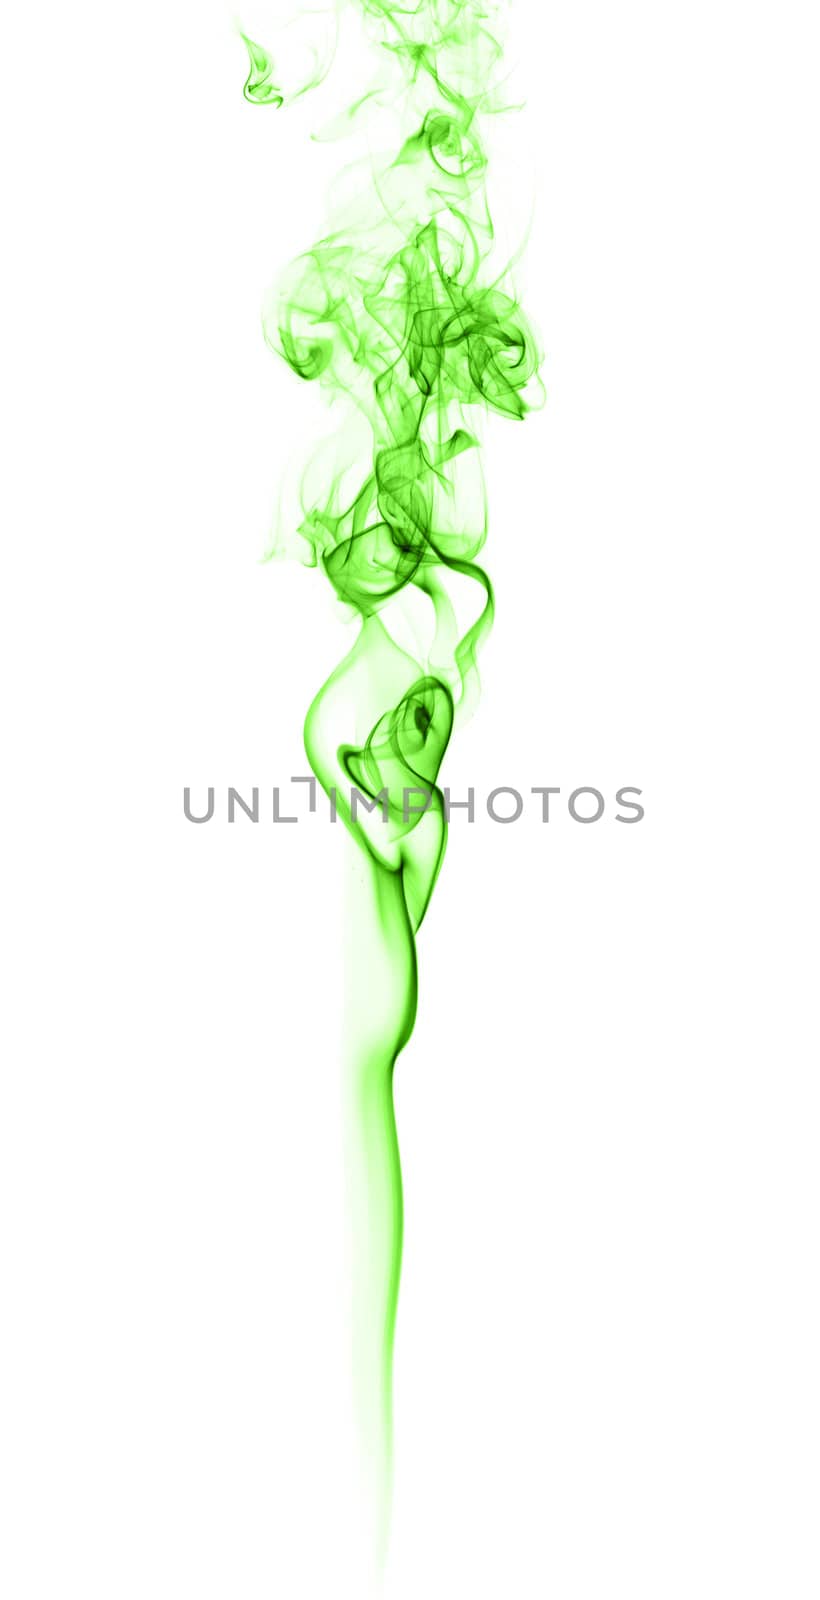 green abstract smoke pattern on a white background